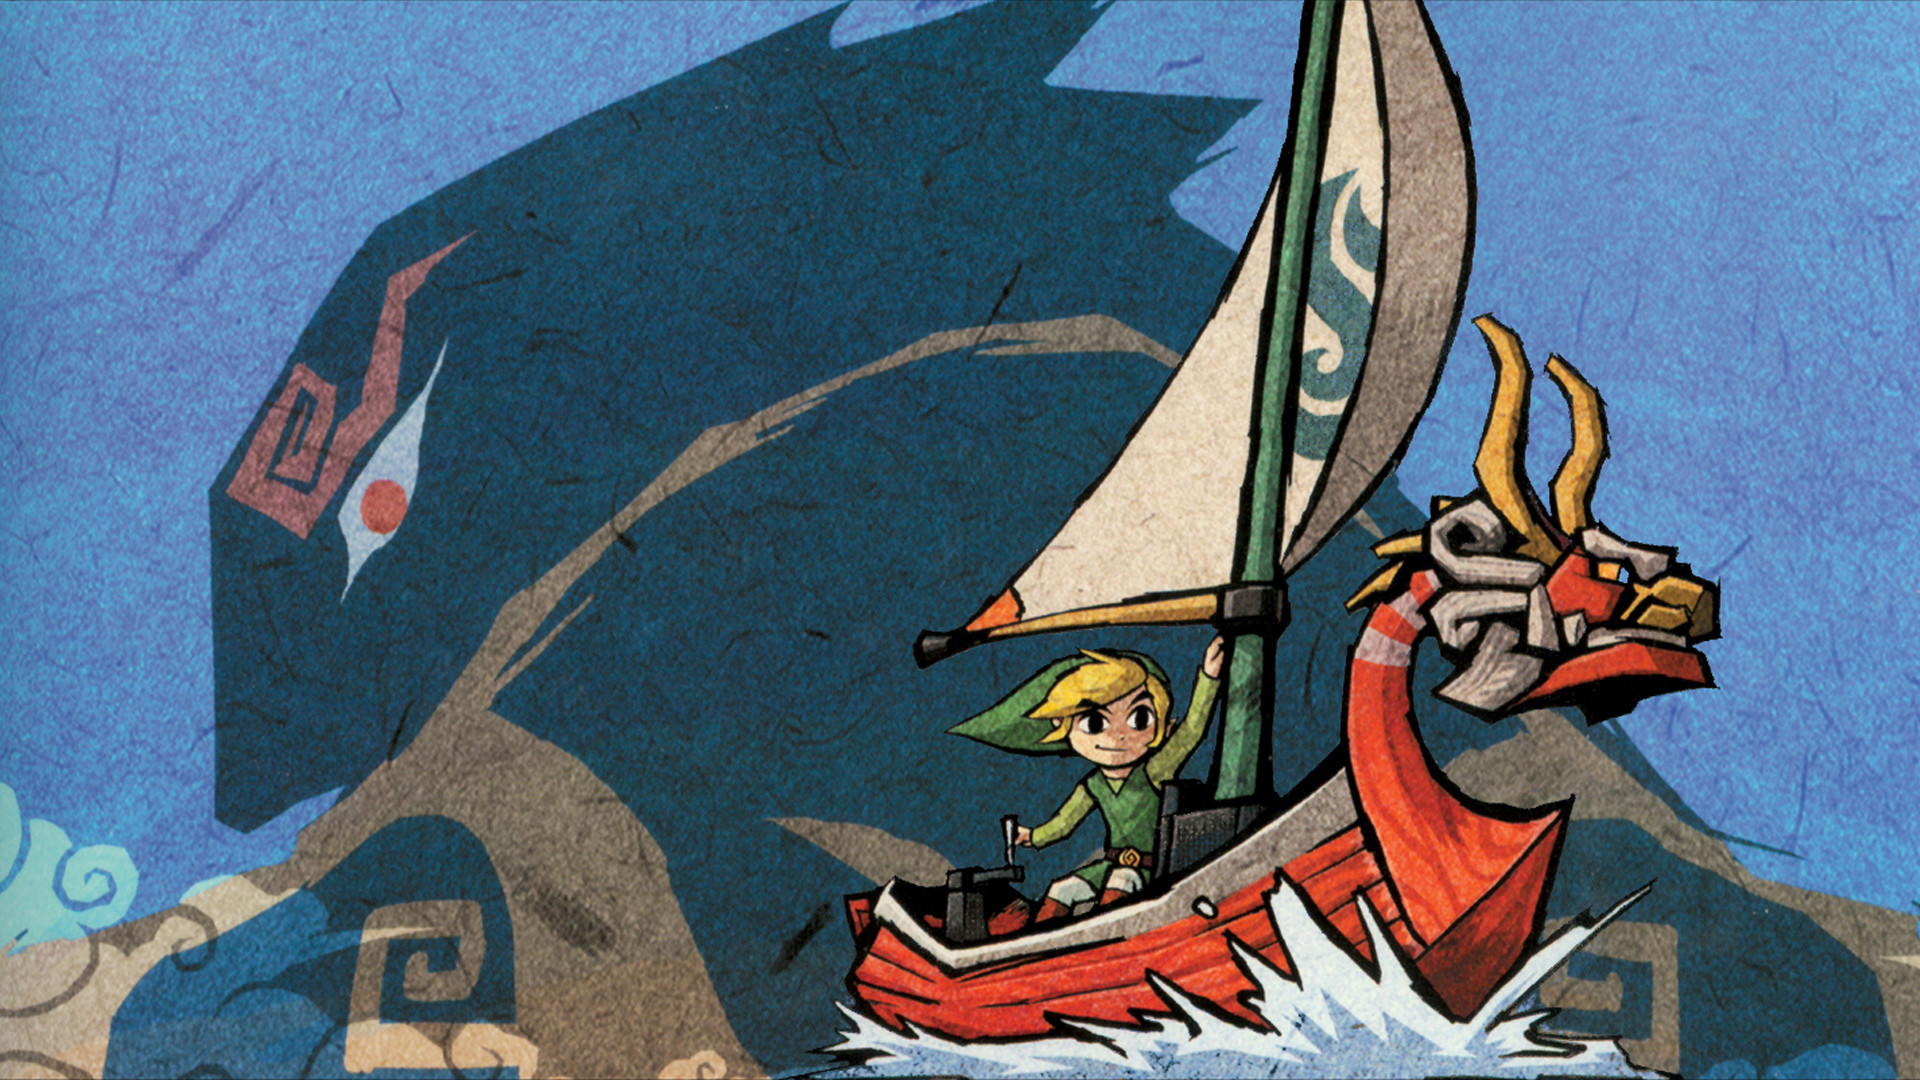 1920x1080 58 The Legend of Zelda: The Wind Waker HD Wallpapers | Backgrounds -  Wallpaper Abyss